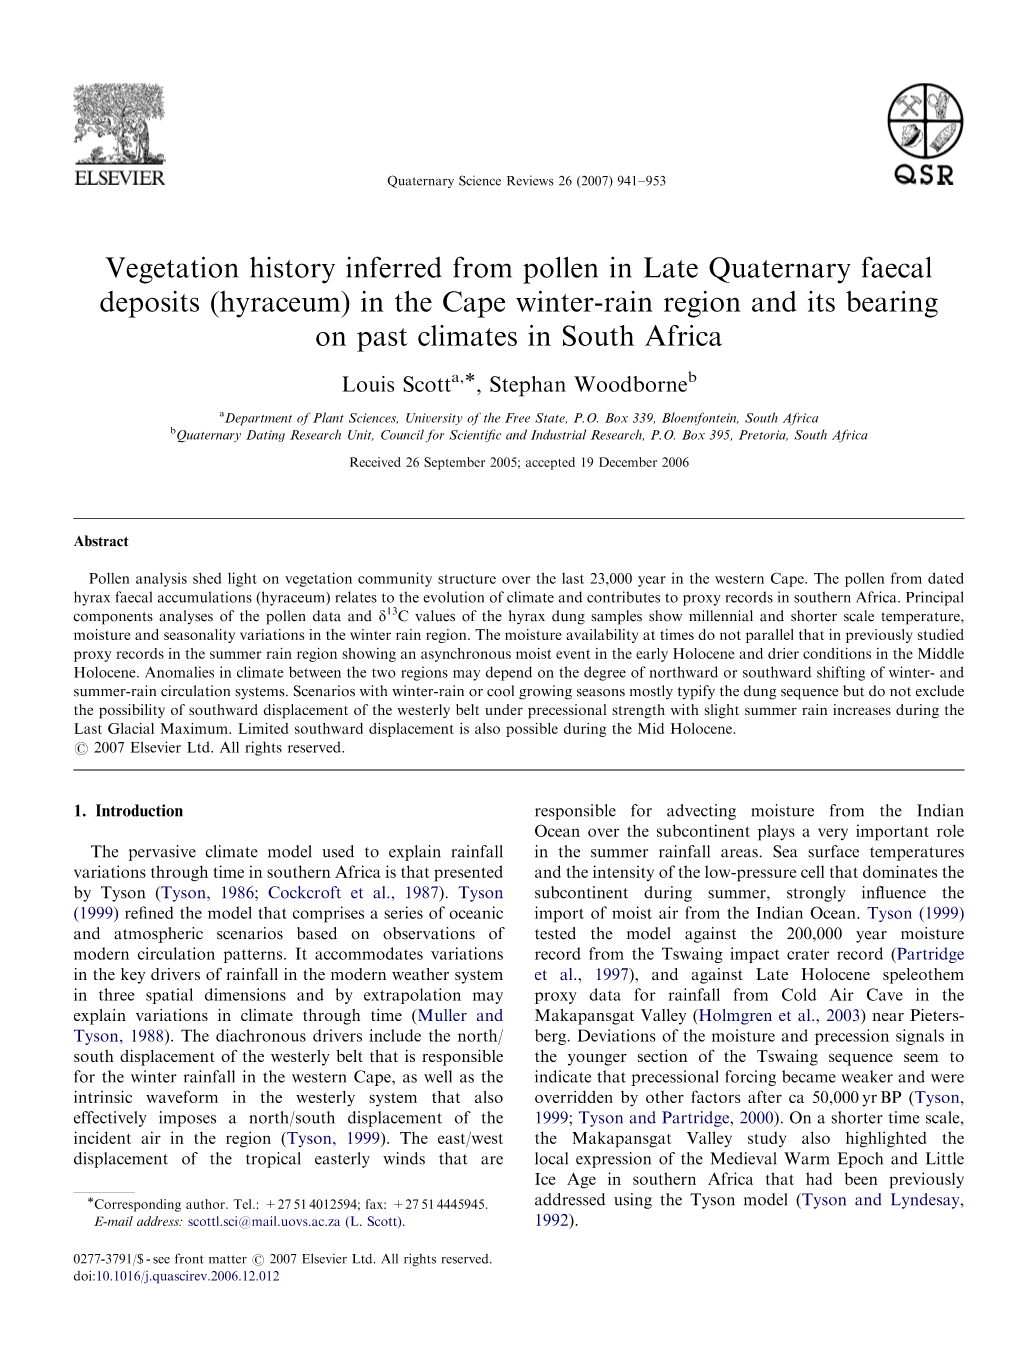 Vegetation History Inferred from Pollen in Late Quaternary Faecal Deposits (Hyraceum) in the Cape Winter-Rain Region and Its Bearing on Past Climates in South Africa